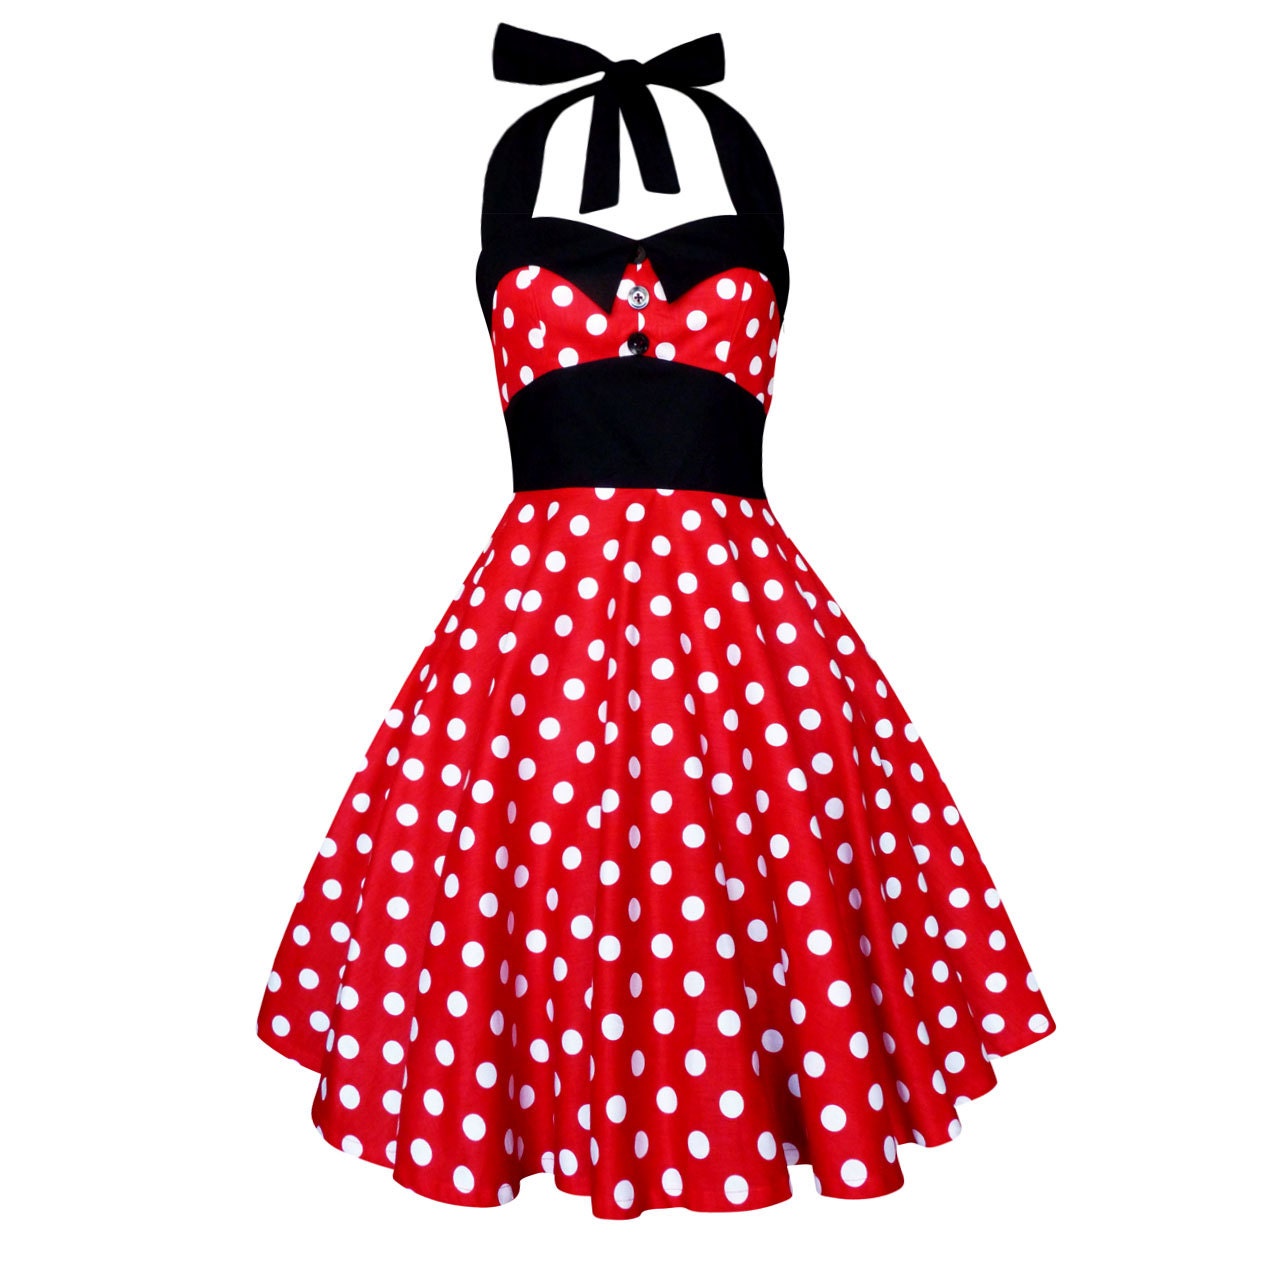 Mickey Mouse Minnie Mouse Dress Disney Dress Red Polka Dots - Etsy